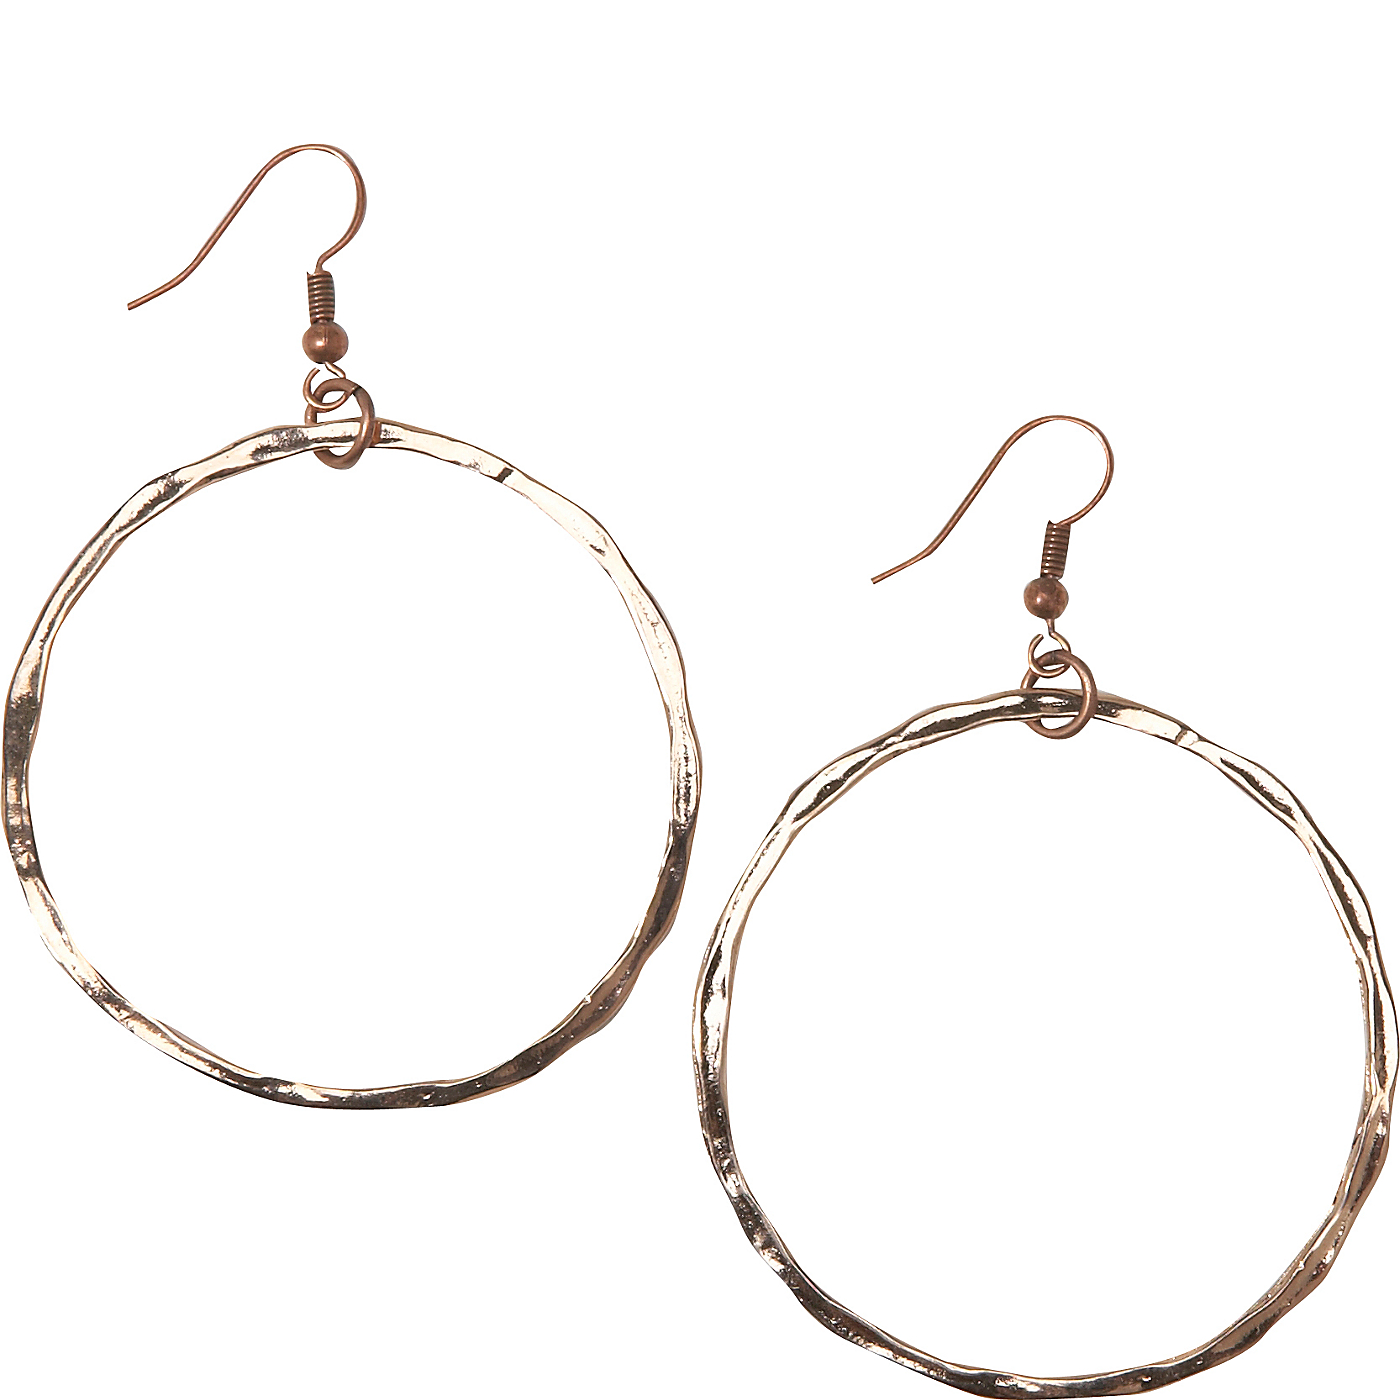 Heather Pullis Designs Rose Gold Plated Hoops After 20% off $31.68